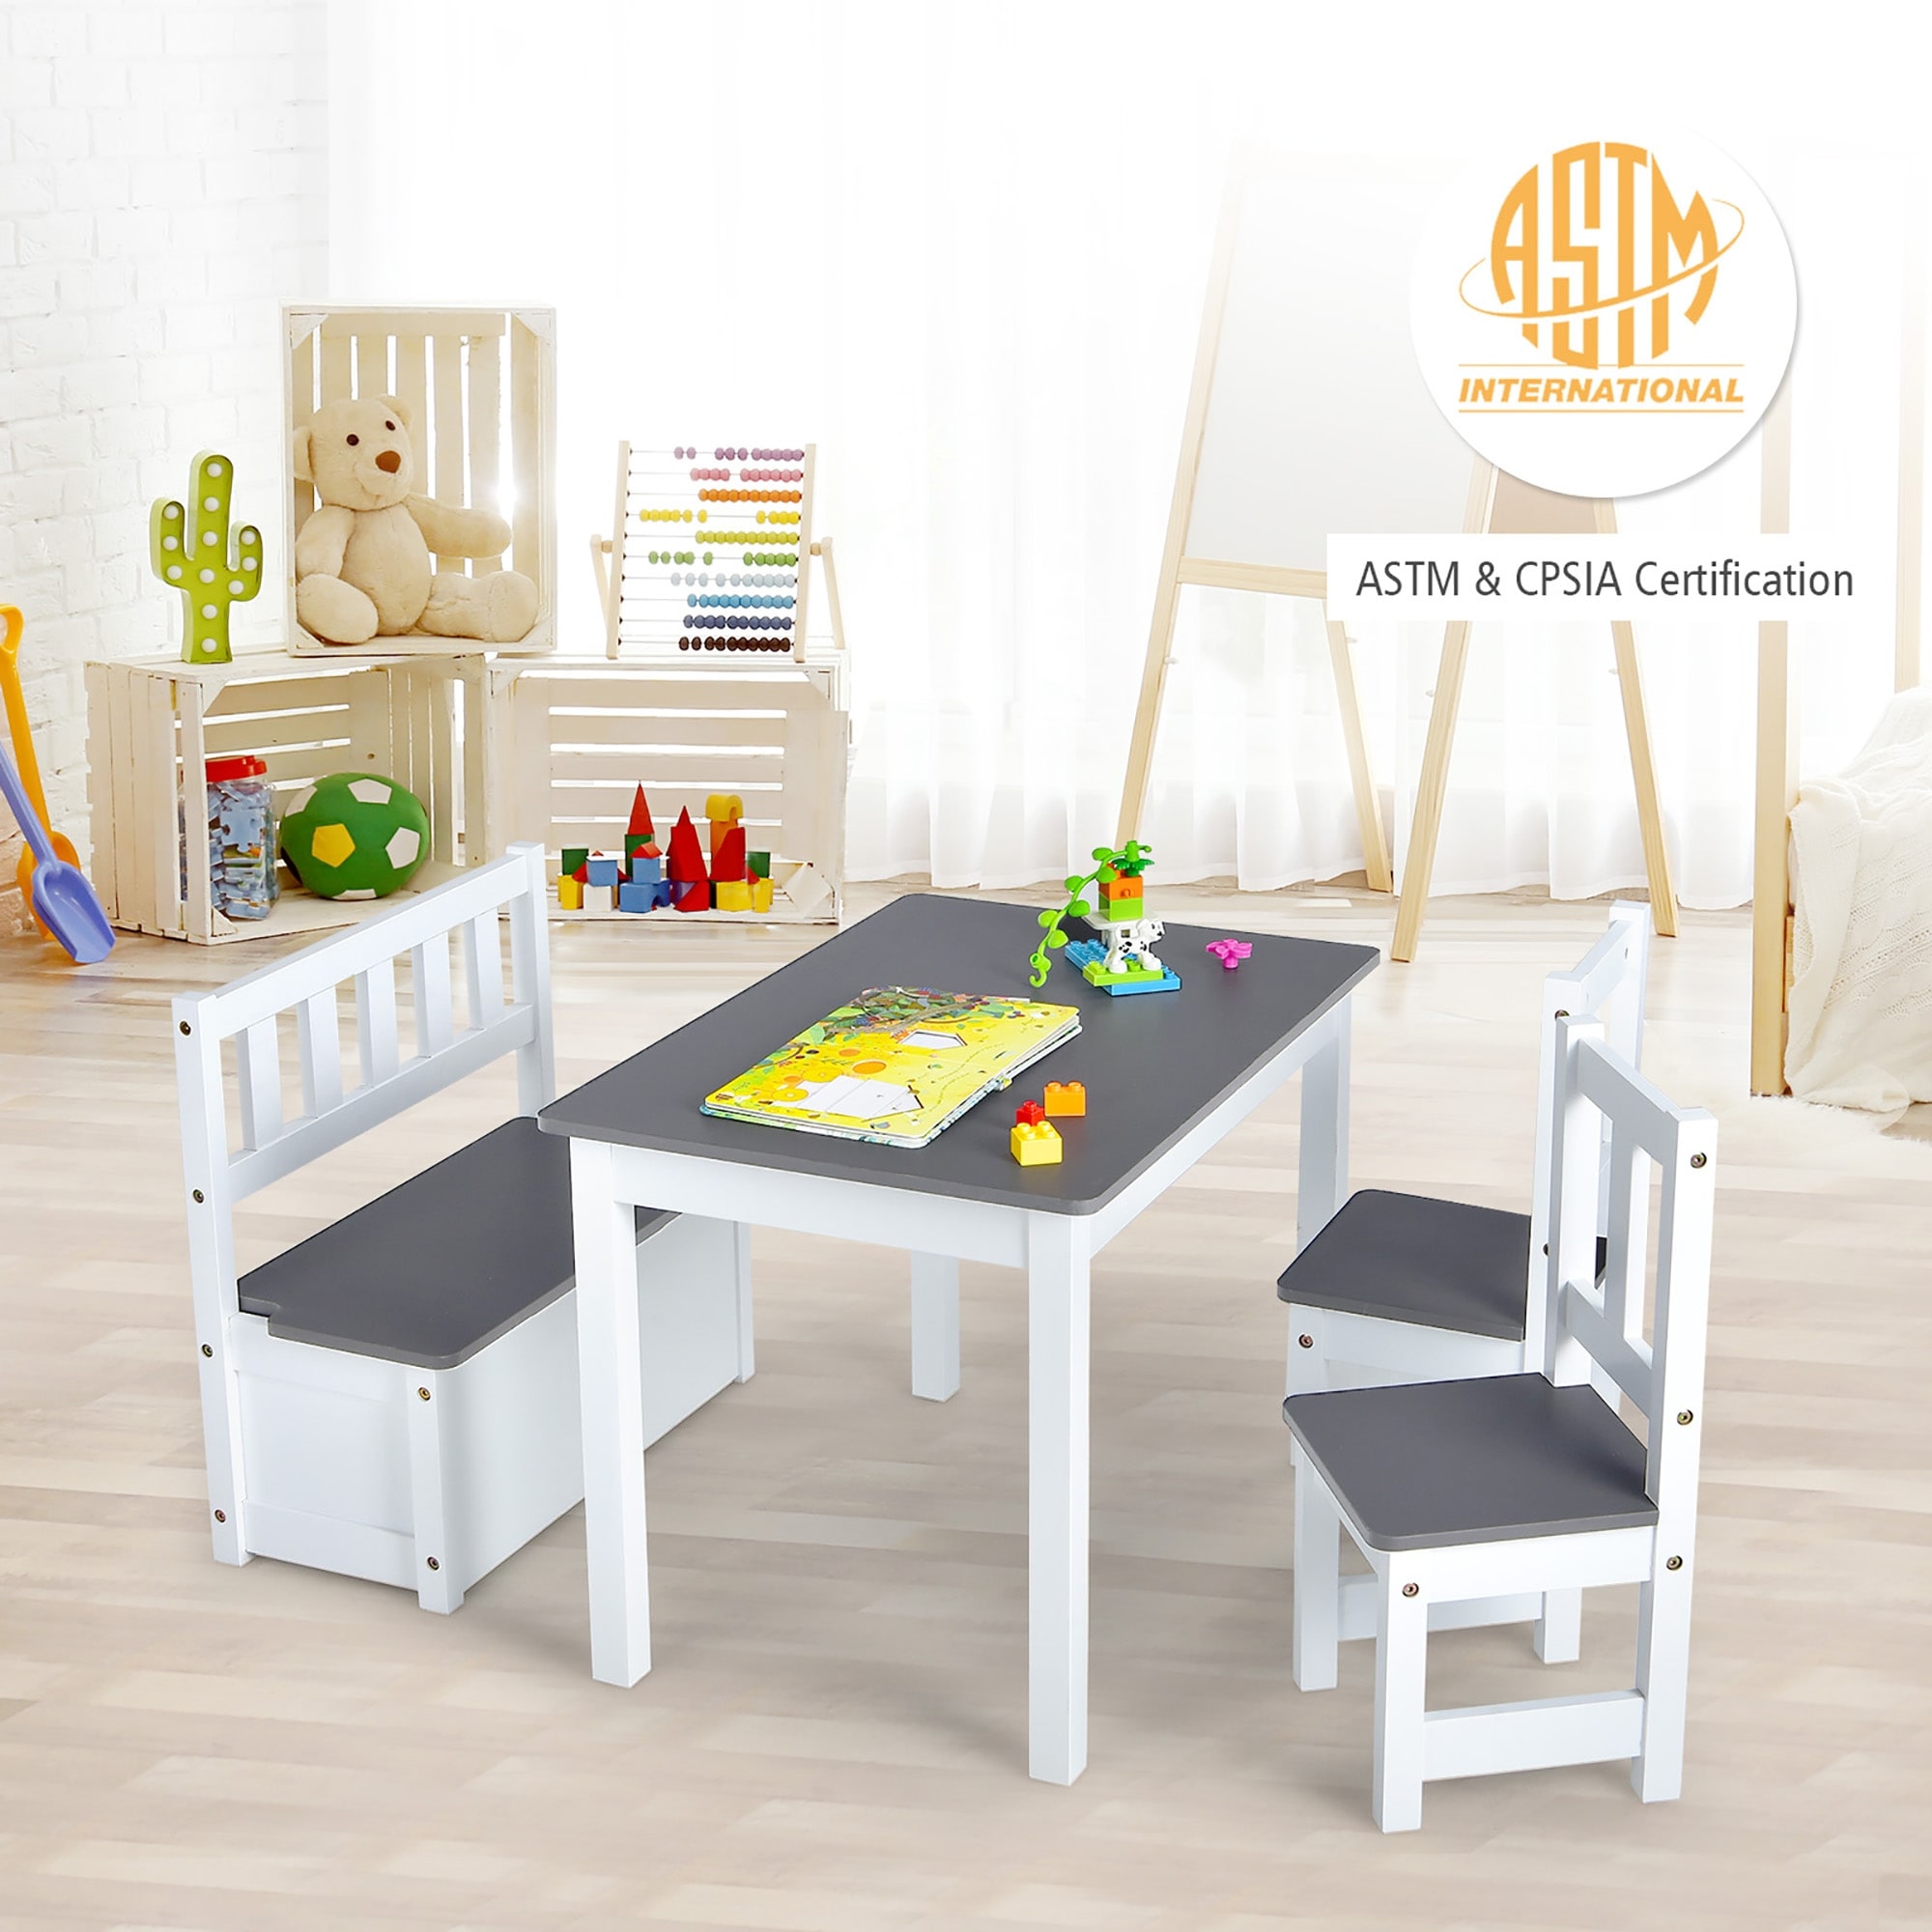 https://ak1.ostkcdn.com/images/products/is/images/direct/4ca5b2ade86450f1e29737ac4eccf10ecb20b1ca/Wooden-Kids-Table-and-Chair-Set-Activity-Table-with-Toy-Storage-Bench.jpg